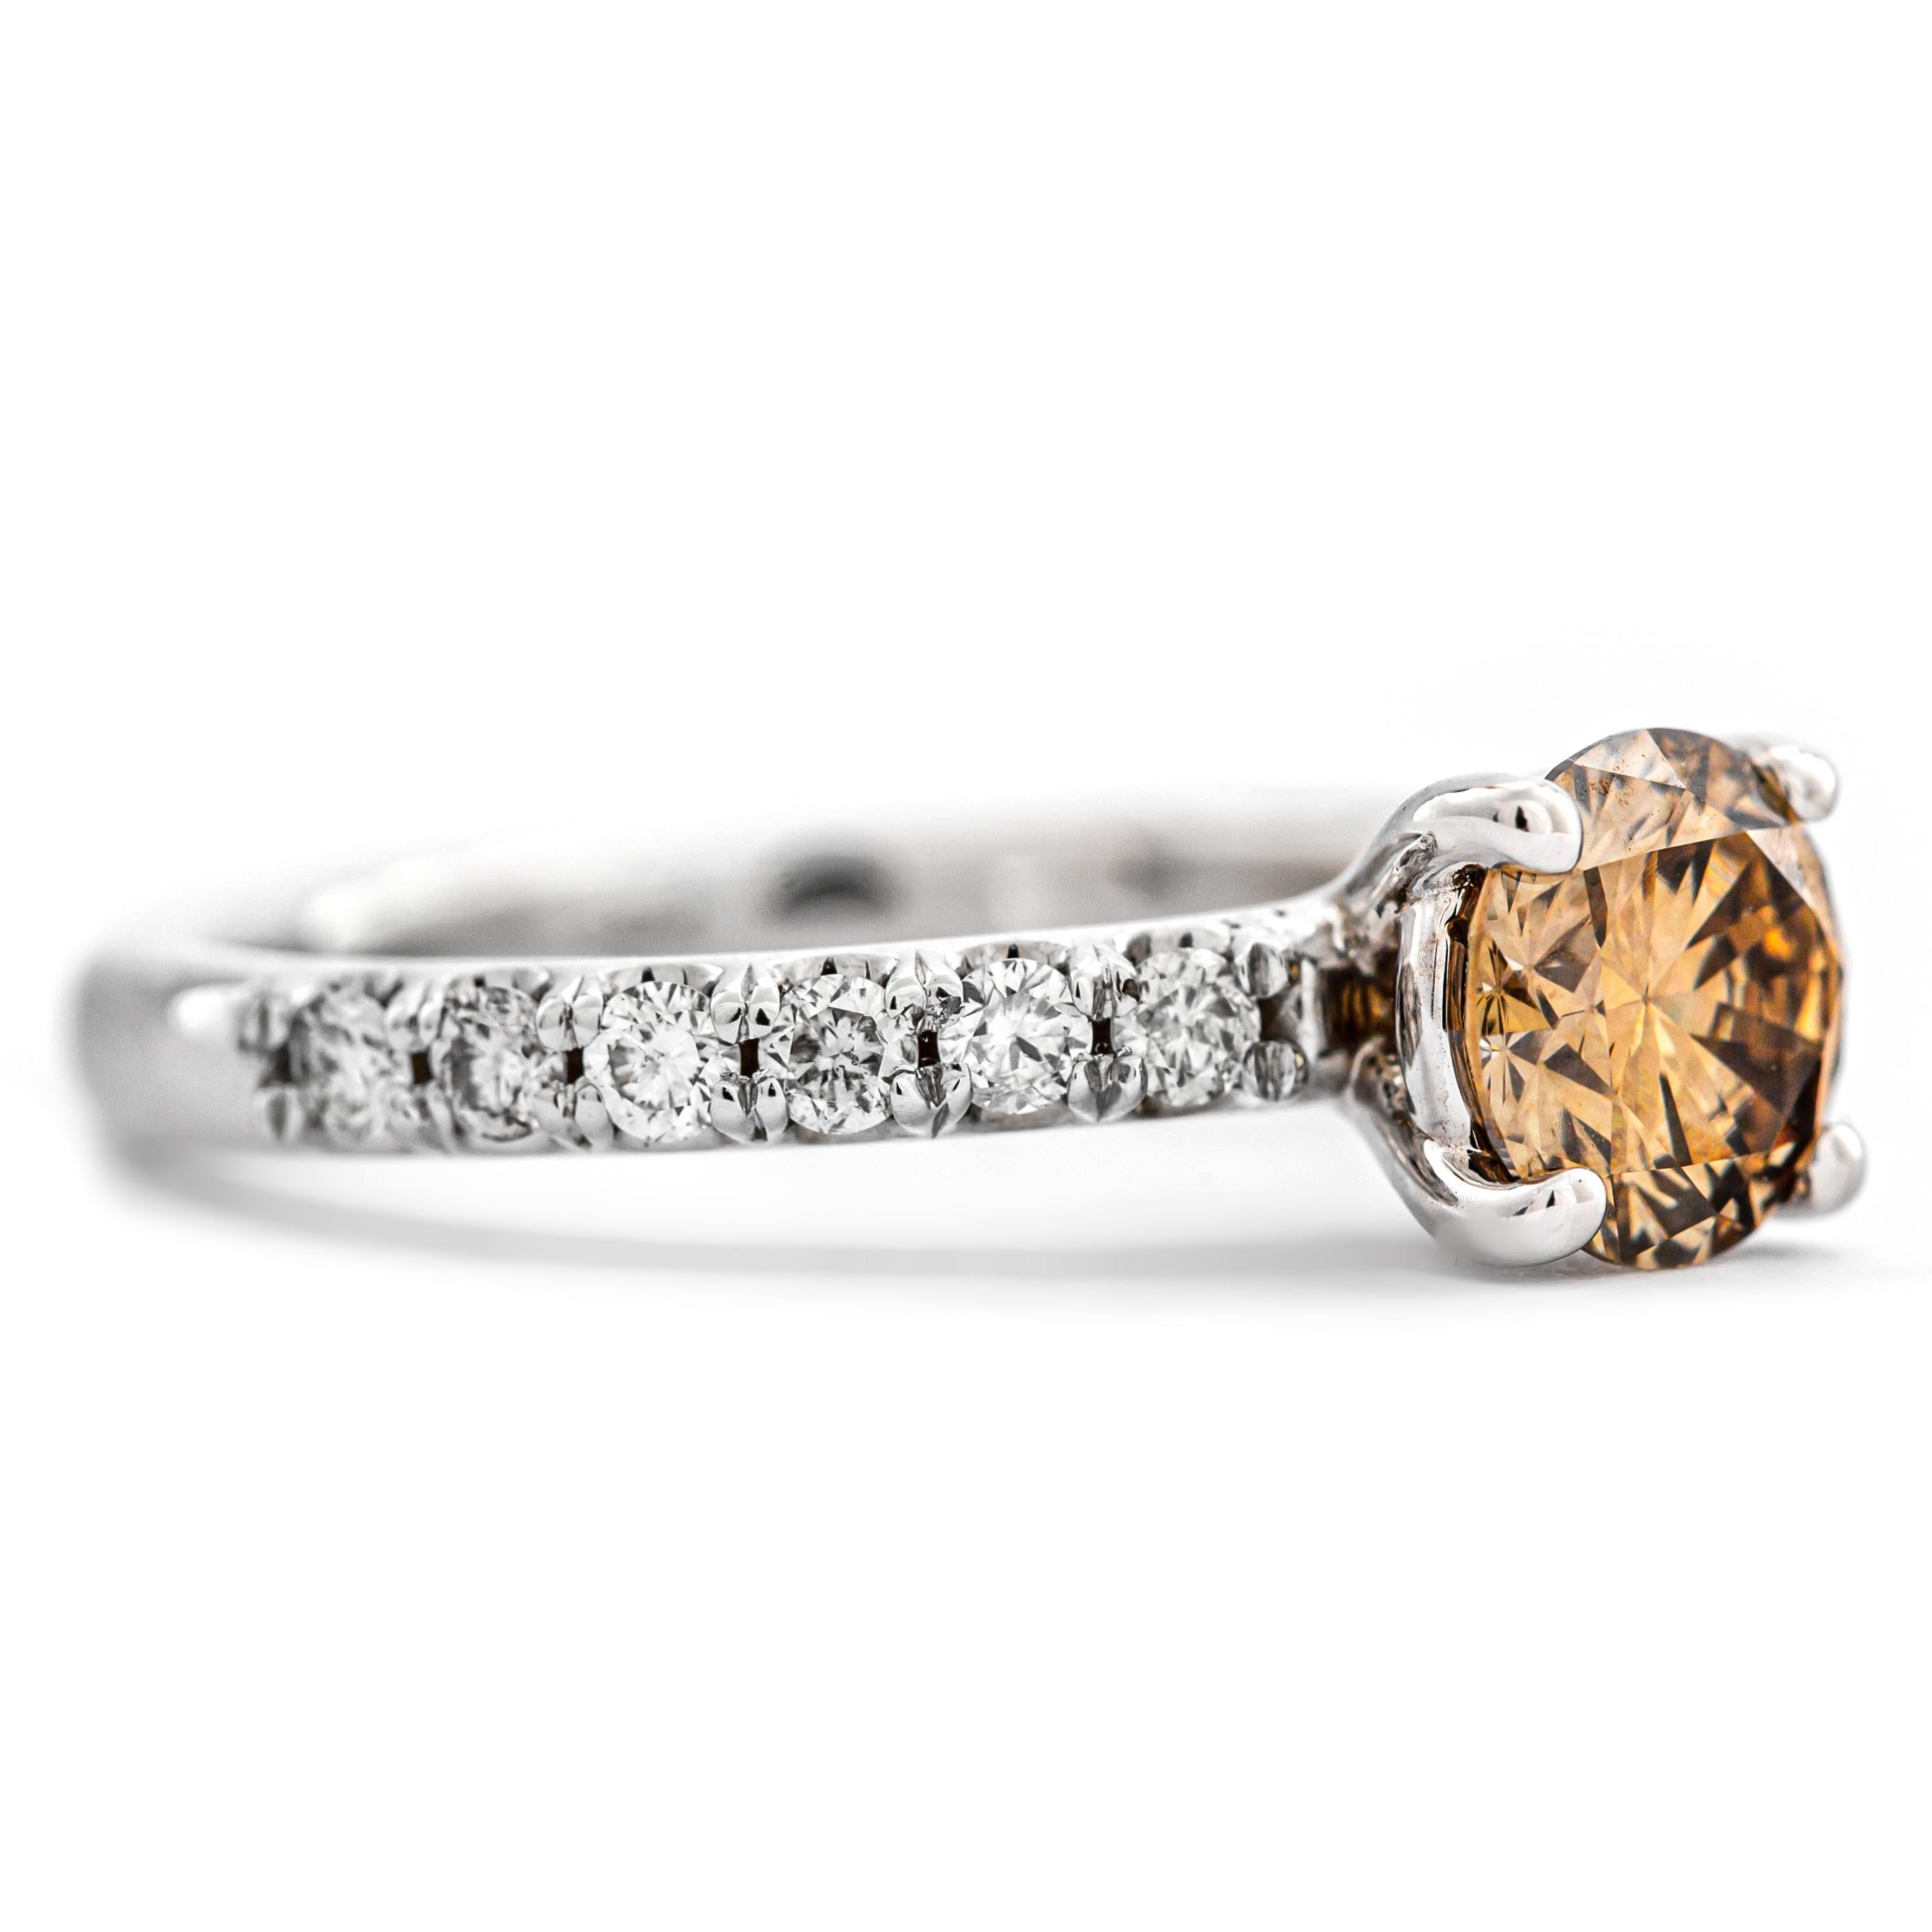 Round Cut 1.11 ct Natural Fancy Deep Yellow Brown Diamond Ring, No Reserve Price